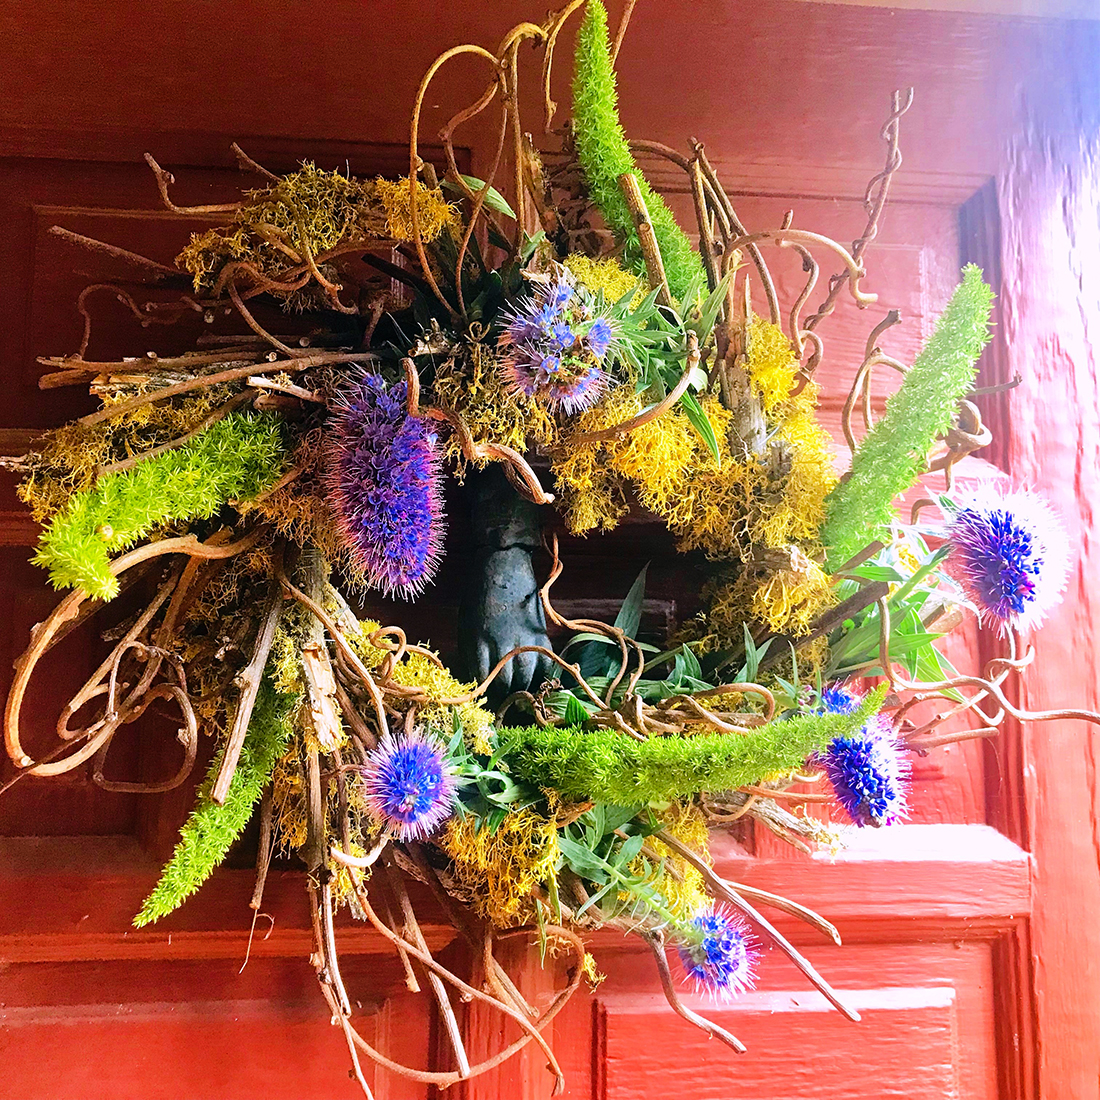 Purple thistles transformed the dried, worn-out wreath on the front door.